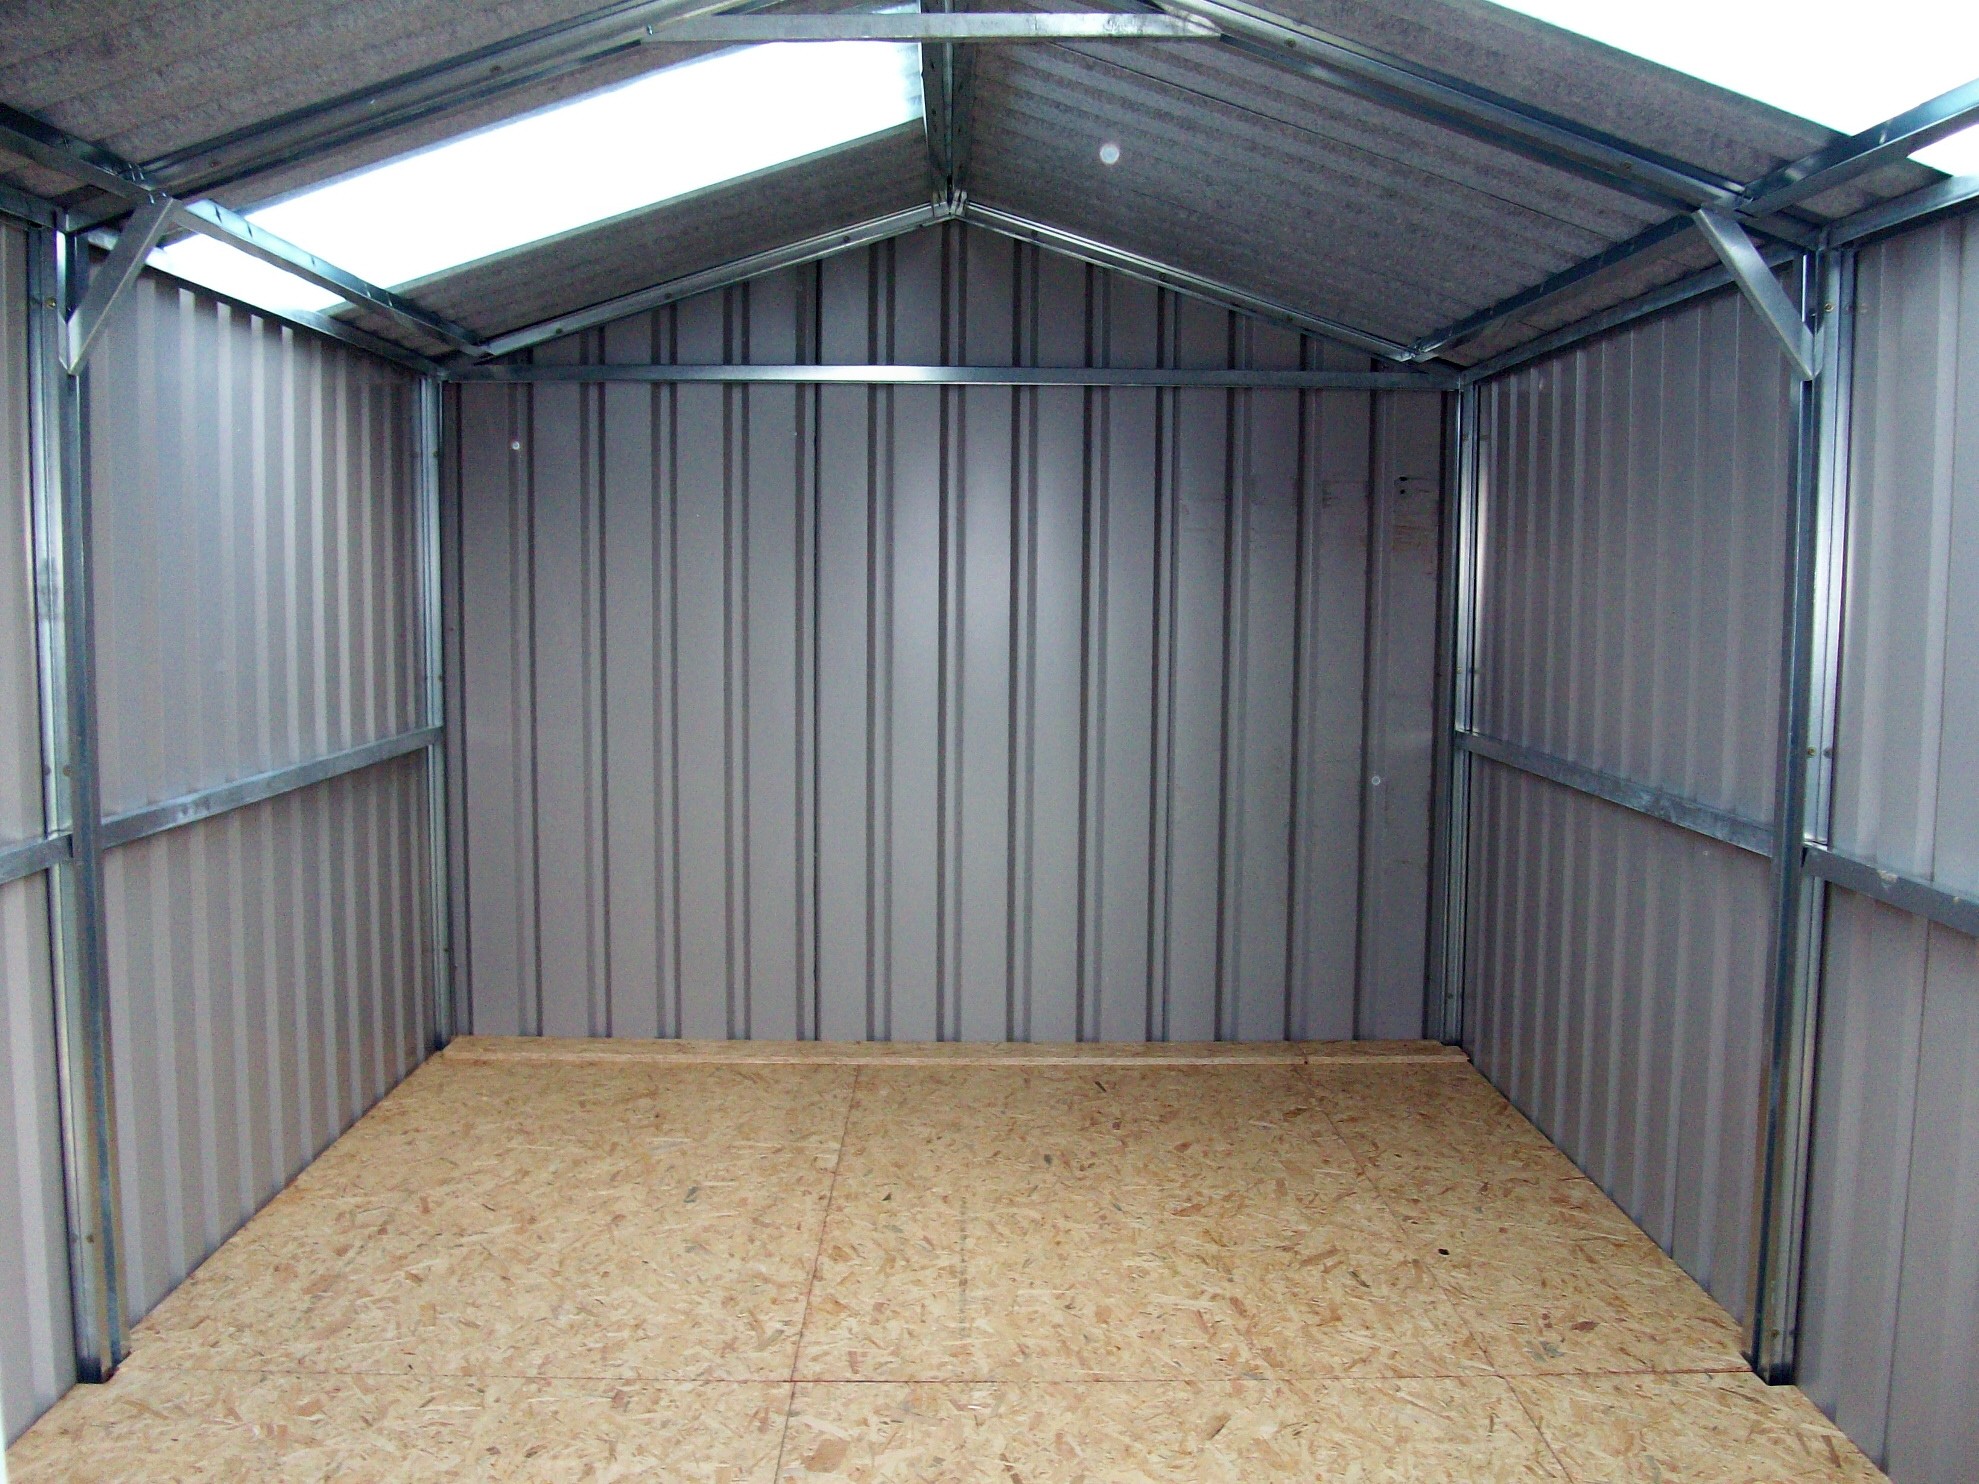 The Mobile Shed â€